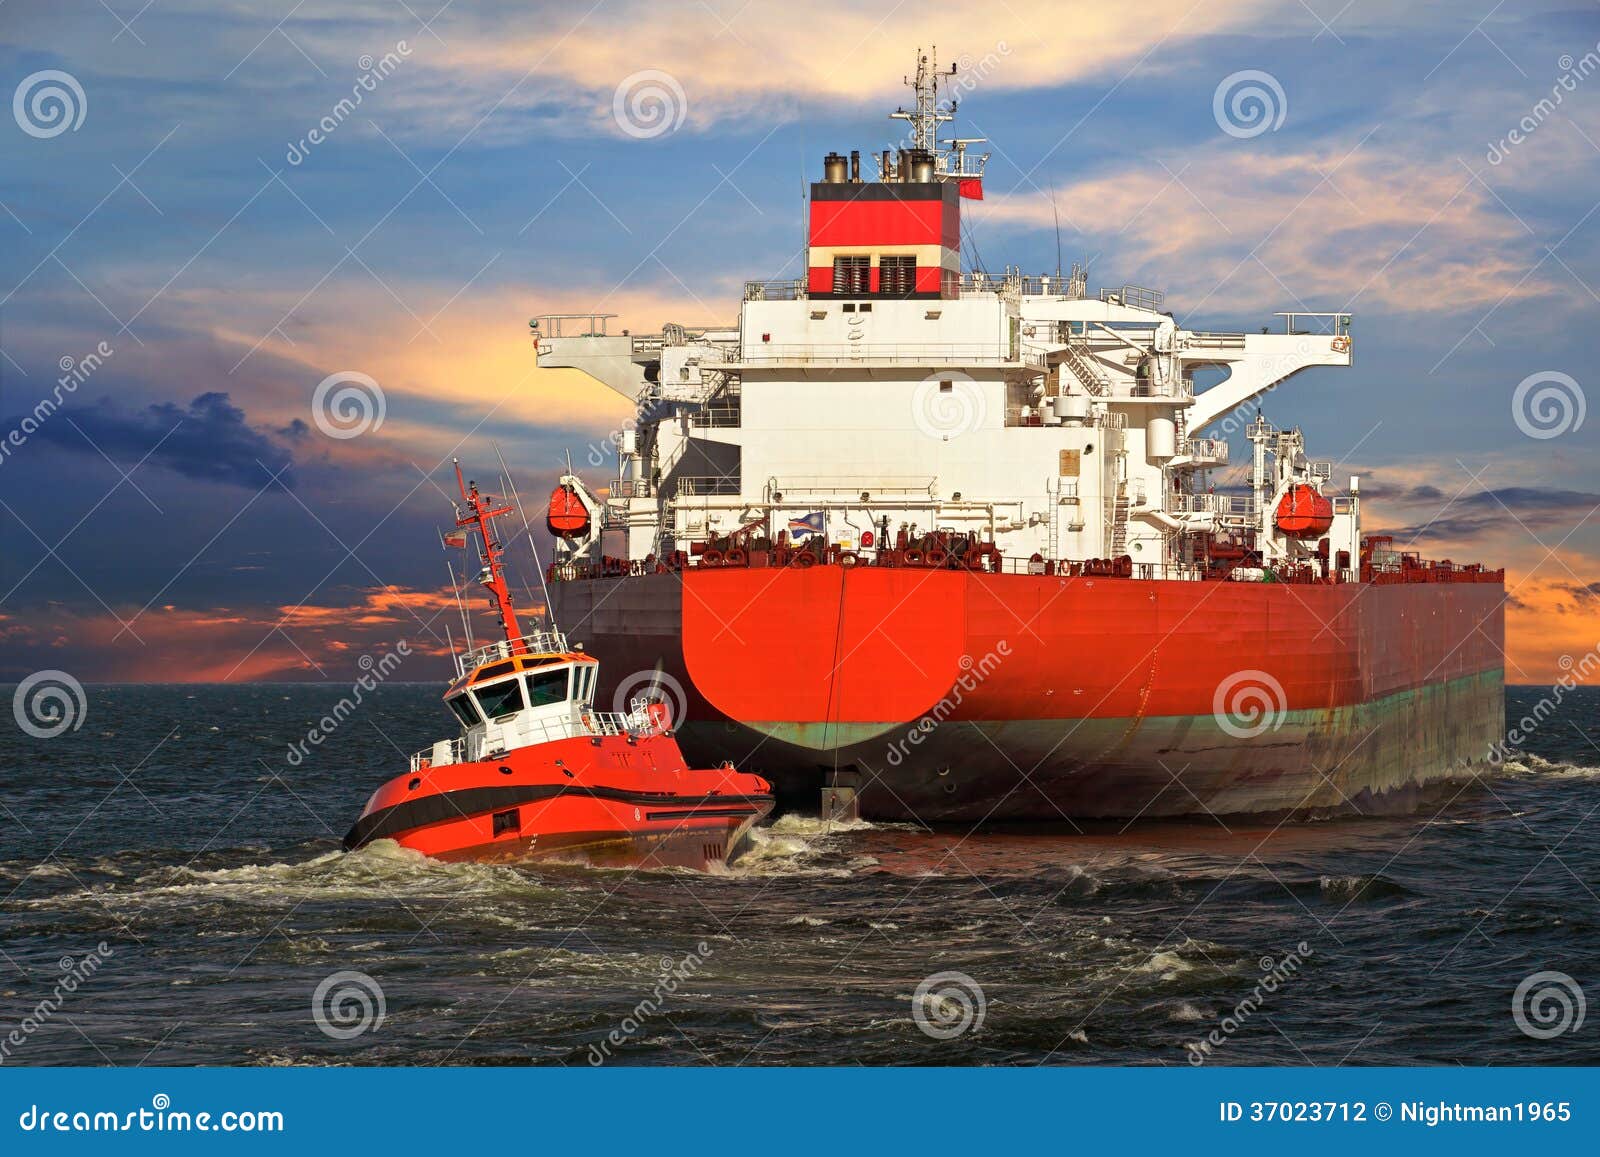 Tugboat towing a ship stock photo. Image of tanker ...